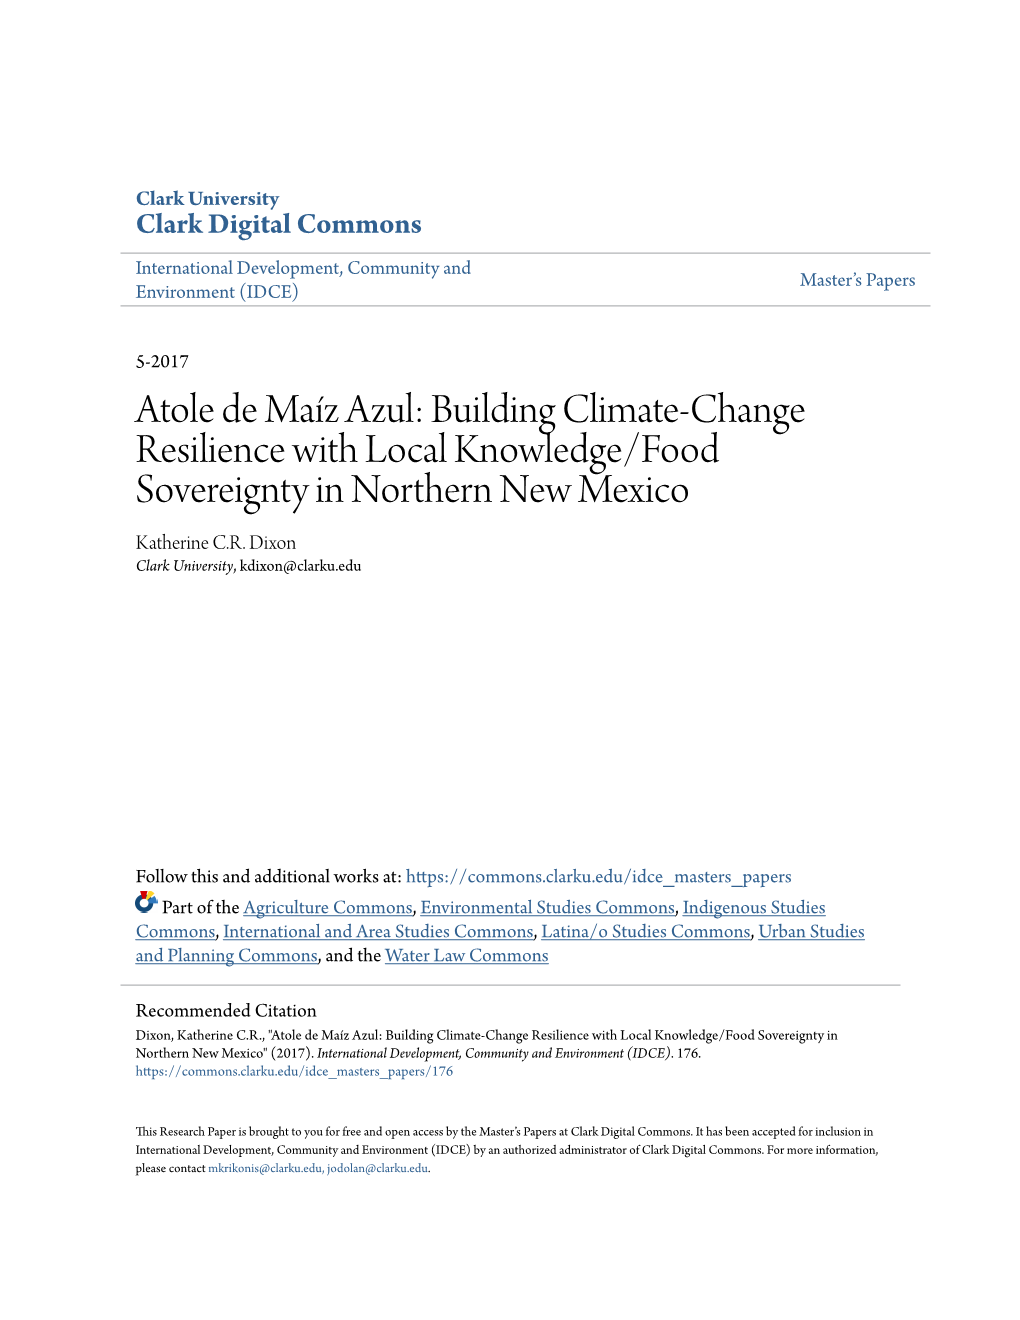 Atole De Maíz Azul: Building Climate-Change Resilience with Local Knowledge/Food Sovereignty in Northern New Mexico Katherine C.R